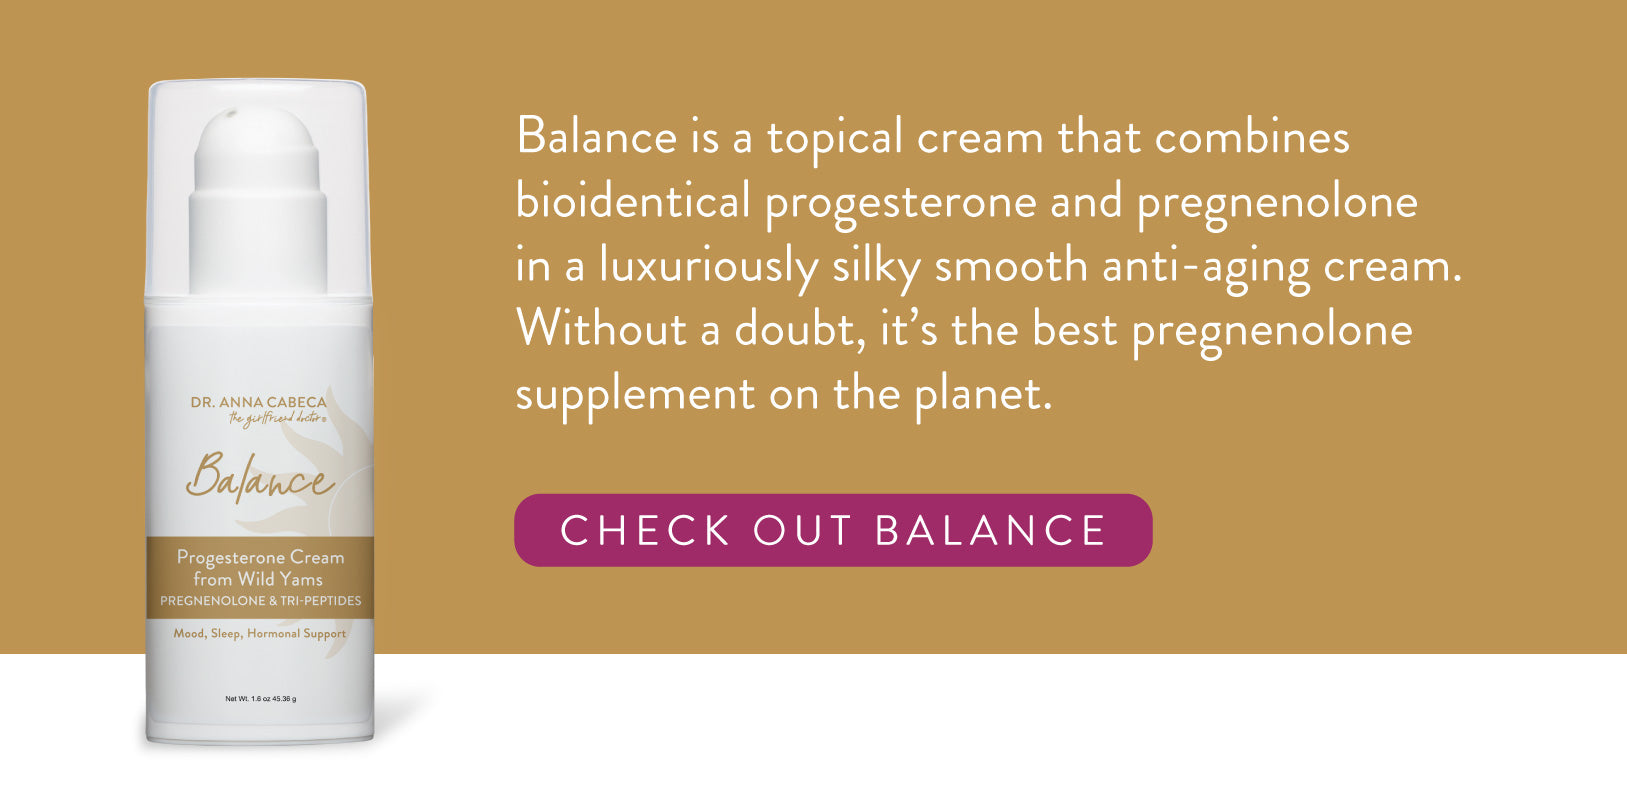 Balance is a topical cream that combines bioidentical progesterone and pregnenolone in a luxuriously silky smooth anti-aging cream. Without a doubt, it’s the best pregnenolone supplement on the planet. 